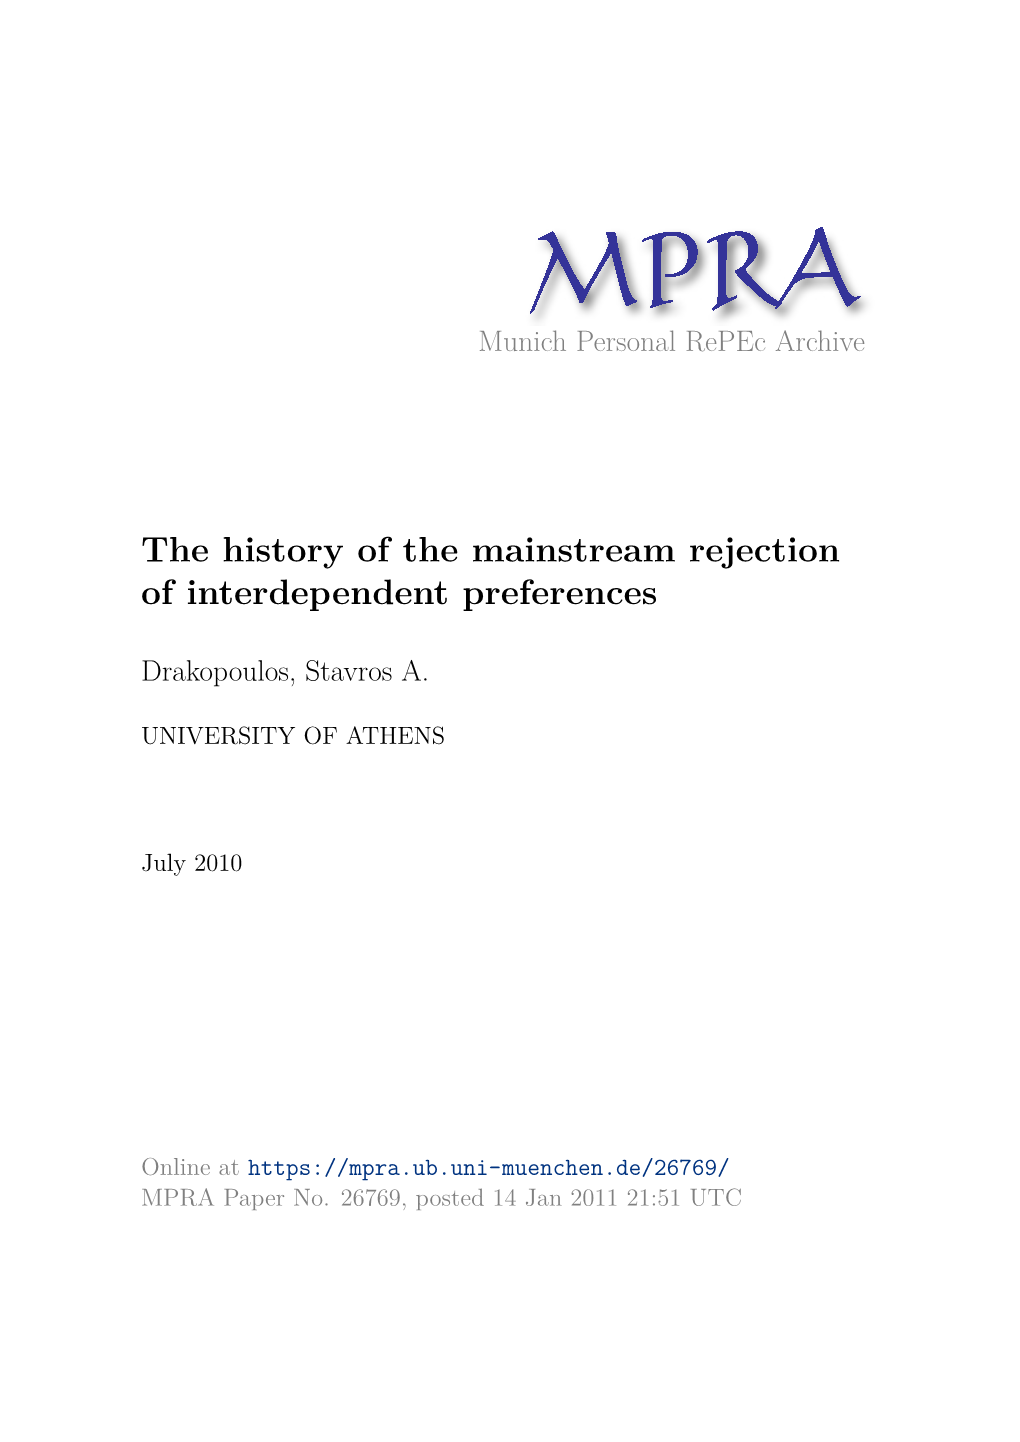 The History of the Mainstream Rejection of Interdependent Preferences